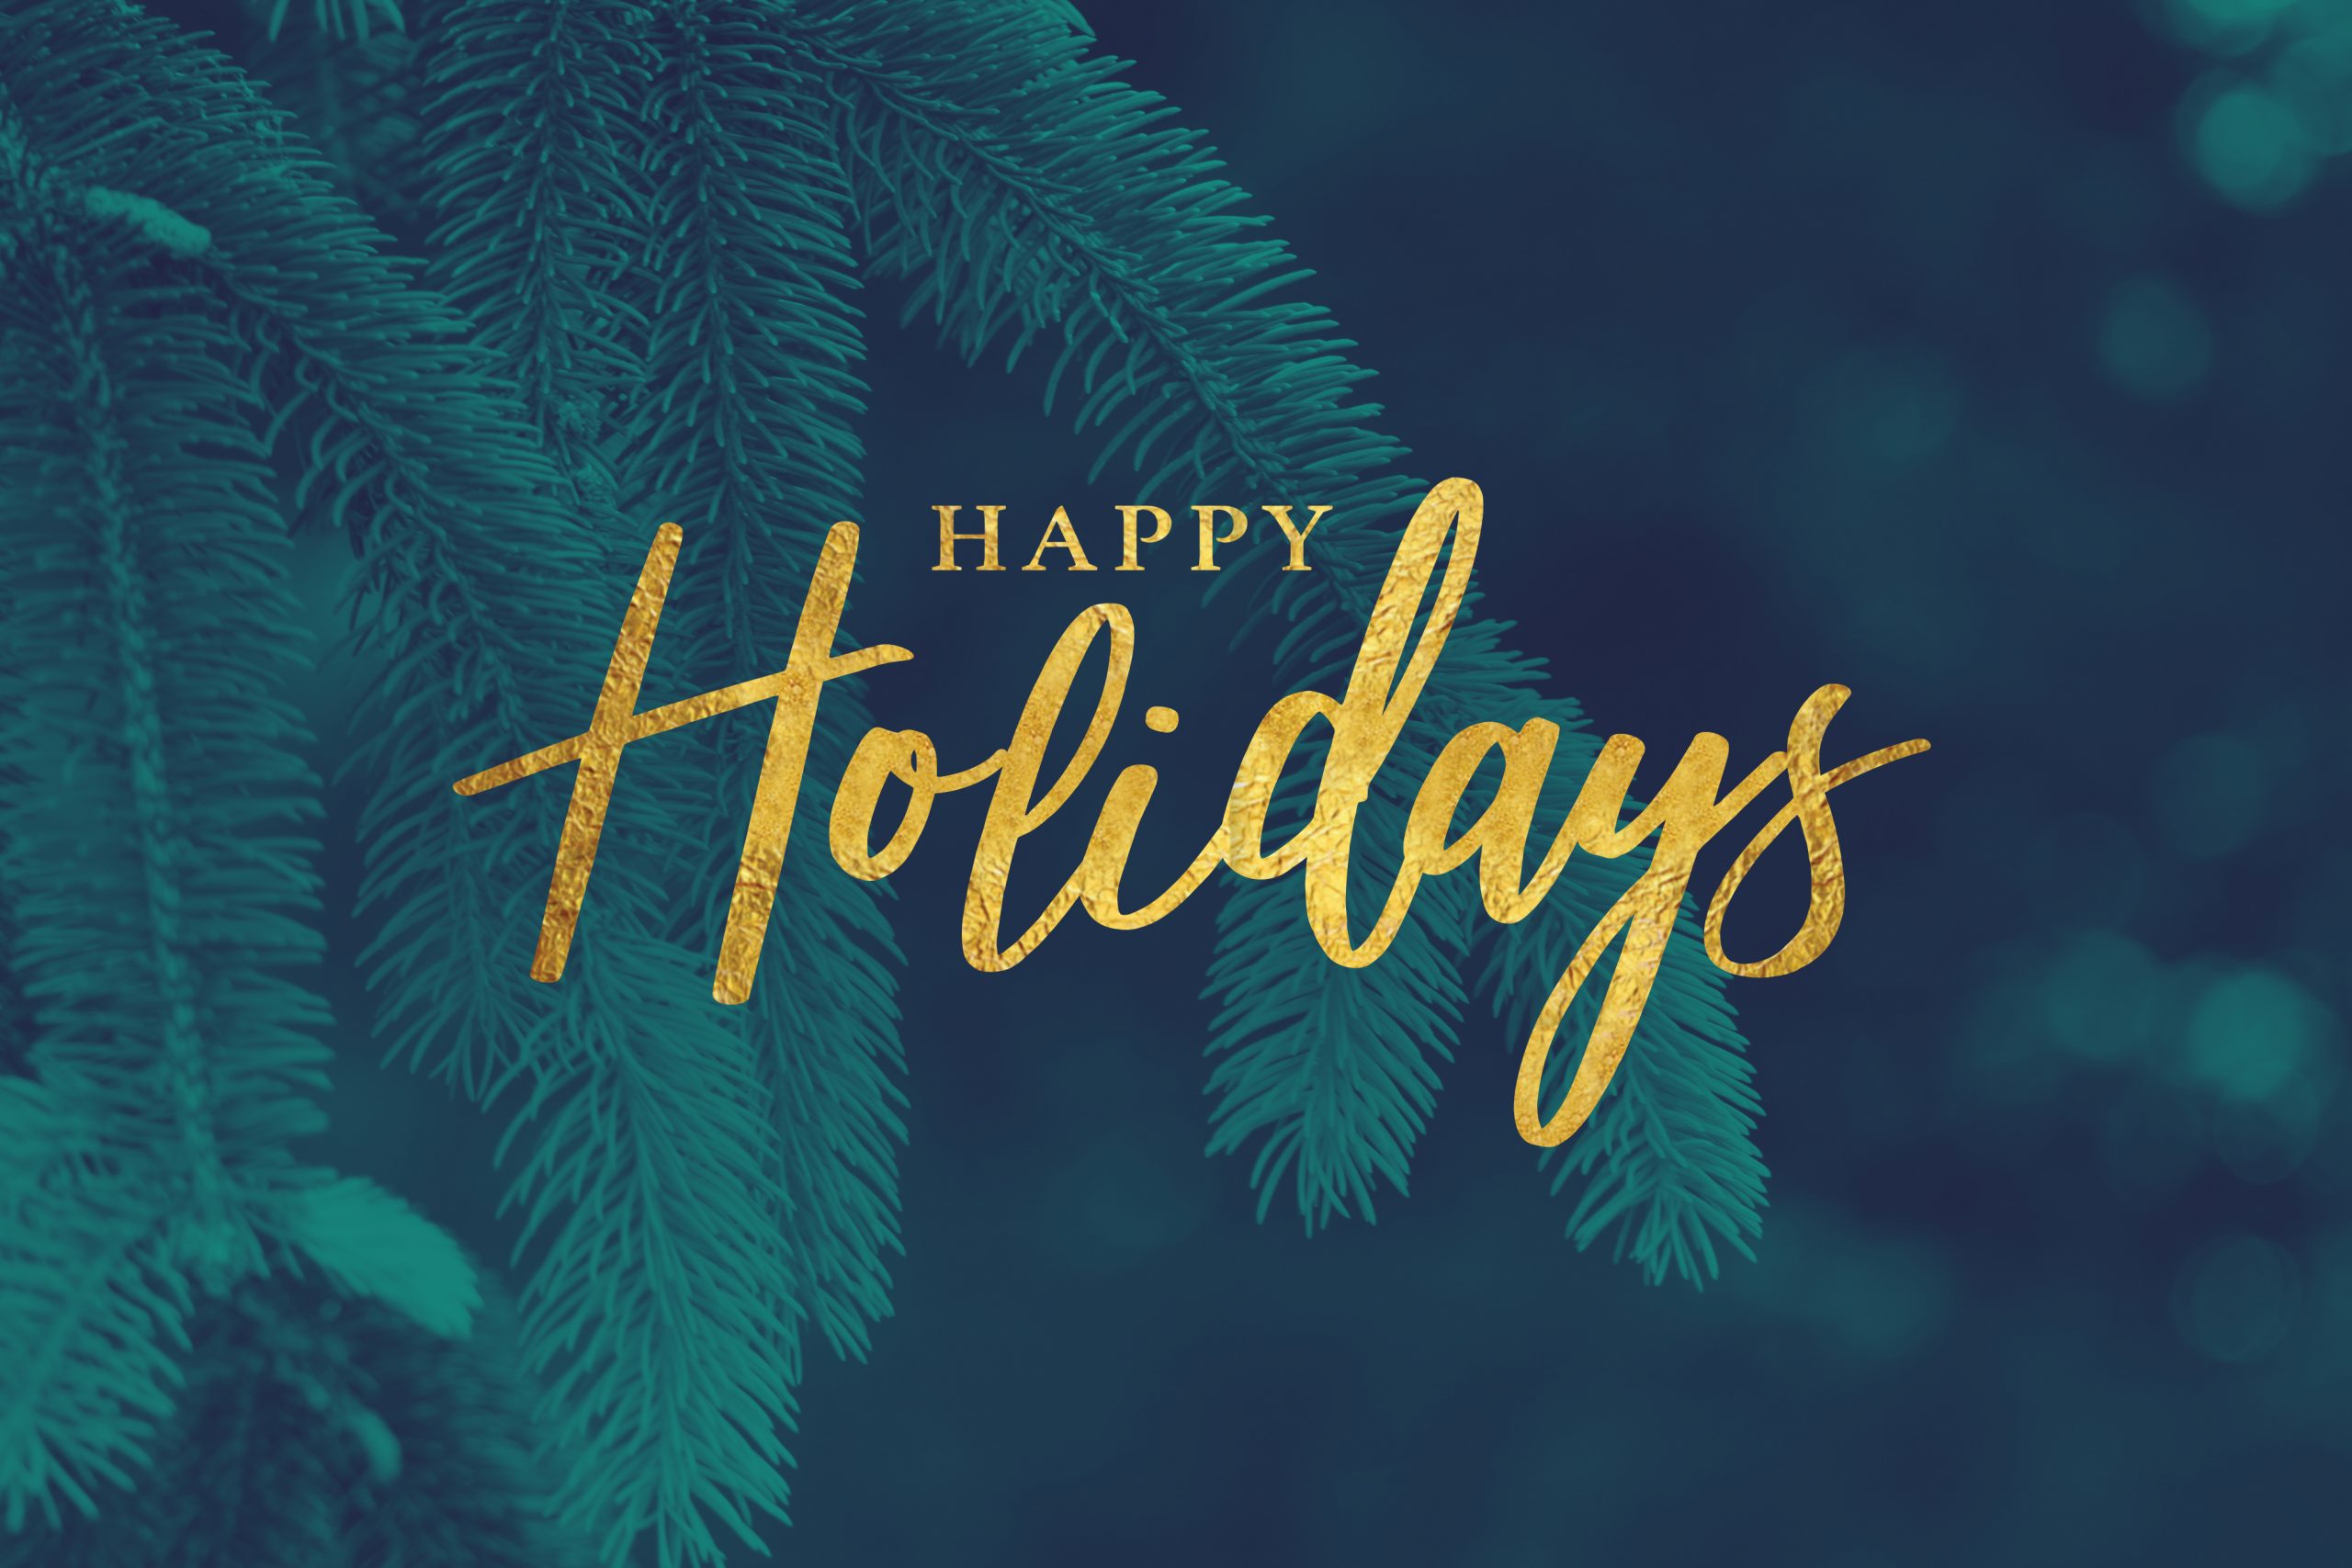 Happy Holidays from Blueline Services - A Comprehensive Background Check and Drug Testing Services Provider! Our Holiday Hours Are Included Here